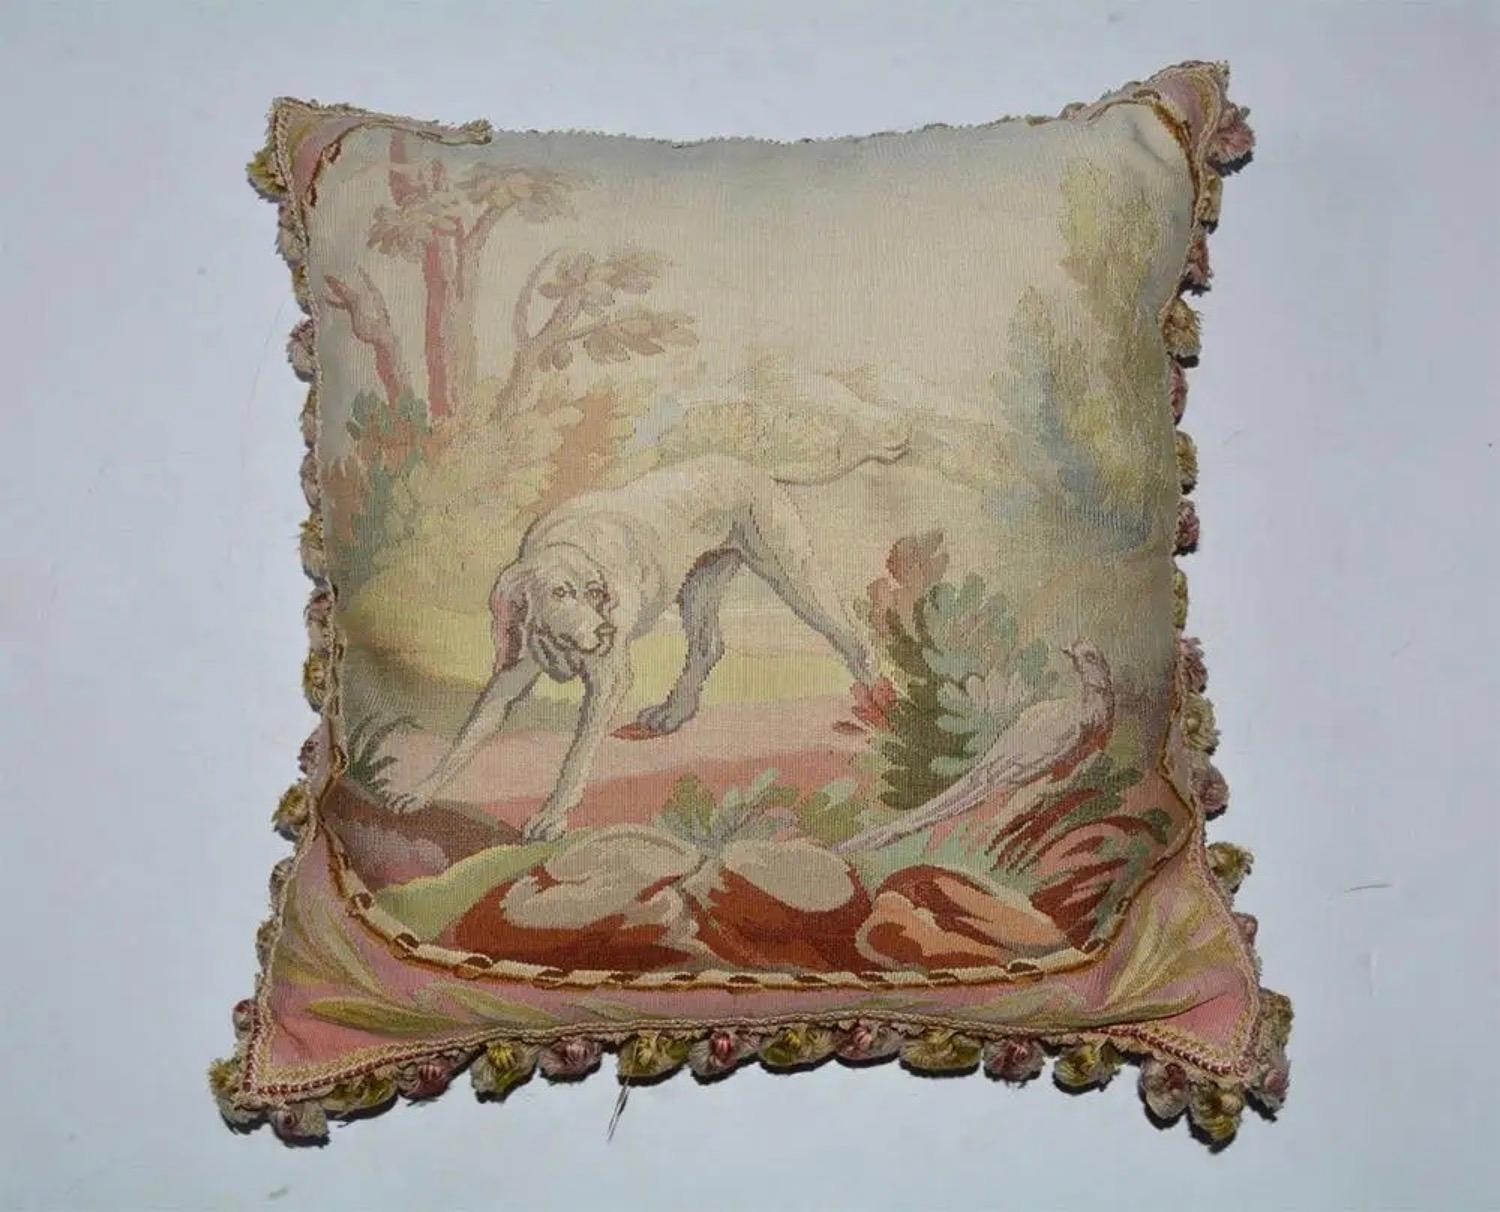 
The front of the vintage pillow is covered in fine multicolored needlepoint depicting a hunting dog and pheasant within a leafy landscape. The back is covered in raspberry cotton velvet. Bullion fringe embellished all four edges. All parts of the